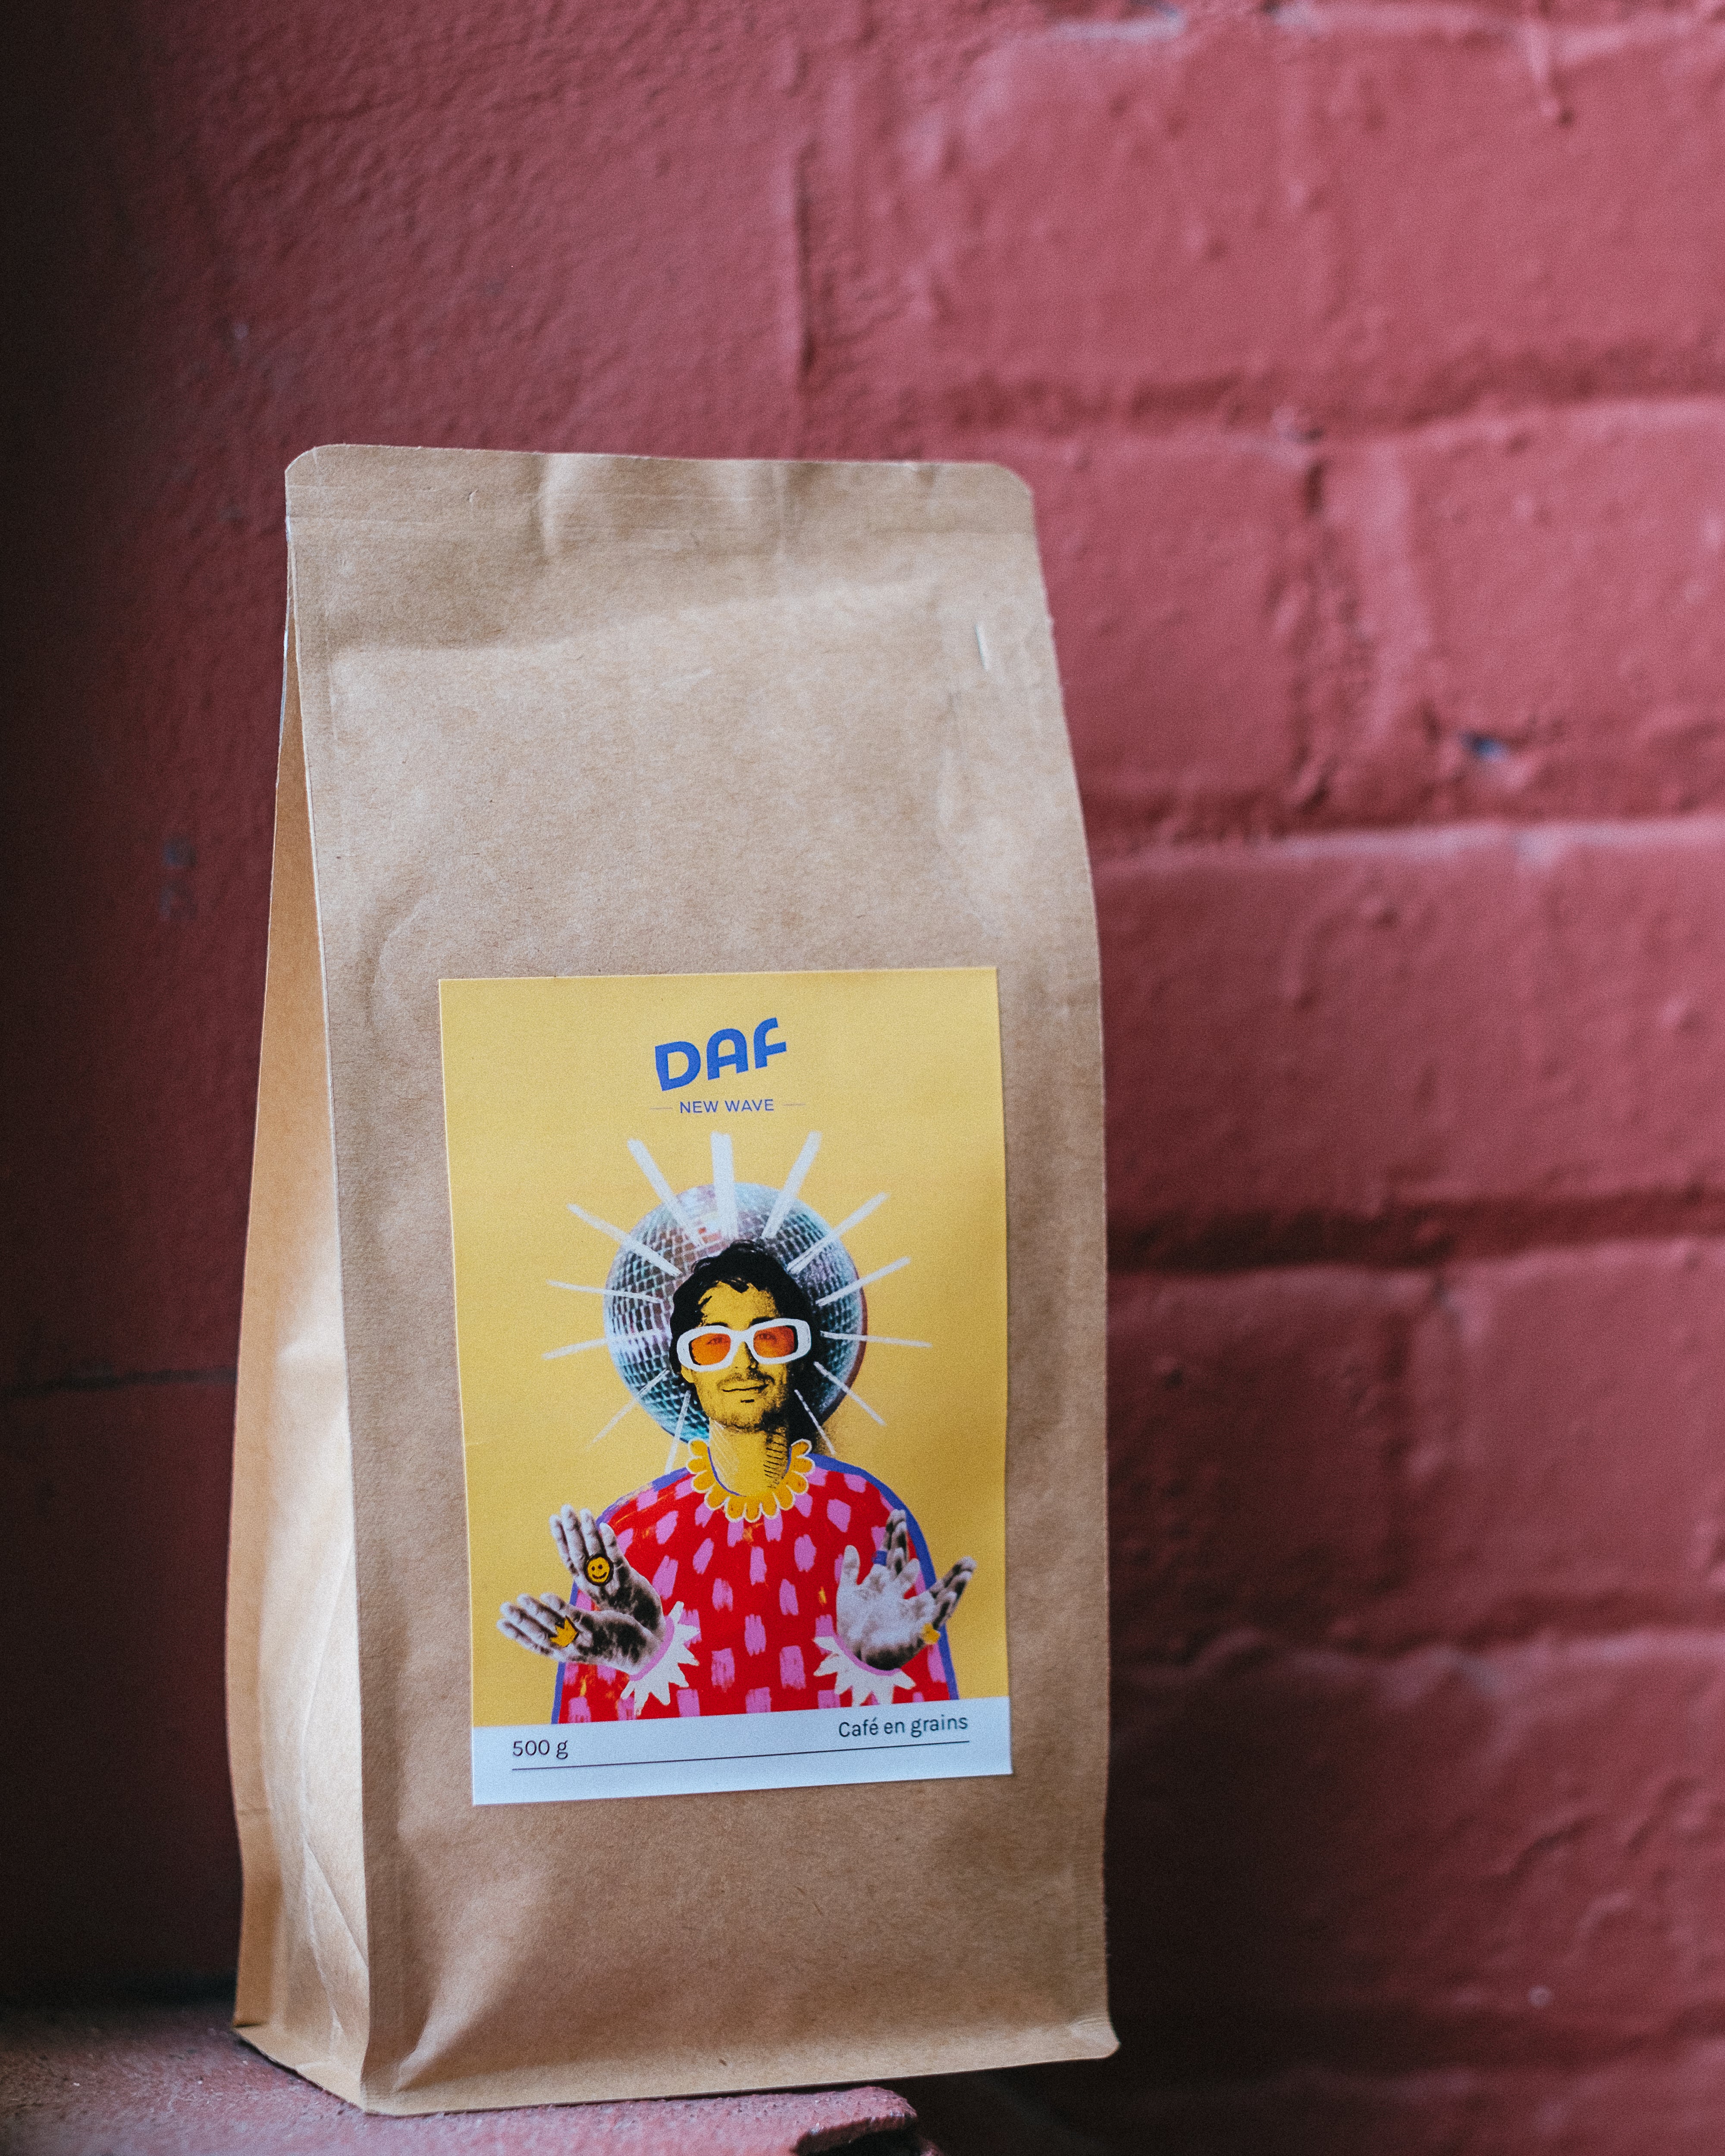 NEW WAVE beans - Sumatra INDONESIA - DAF - Our local brand